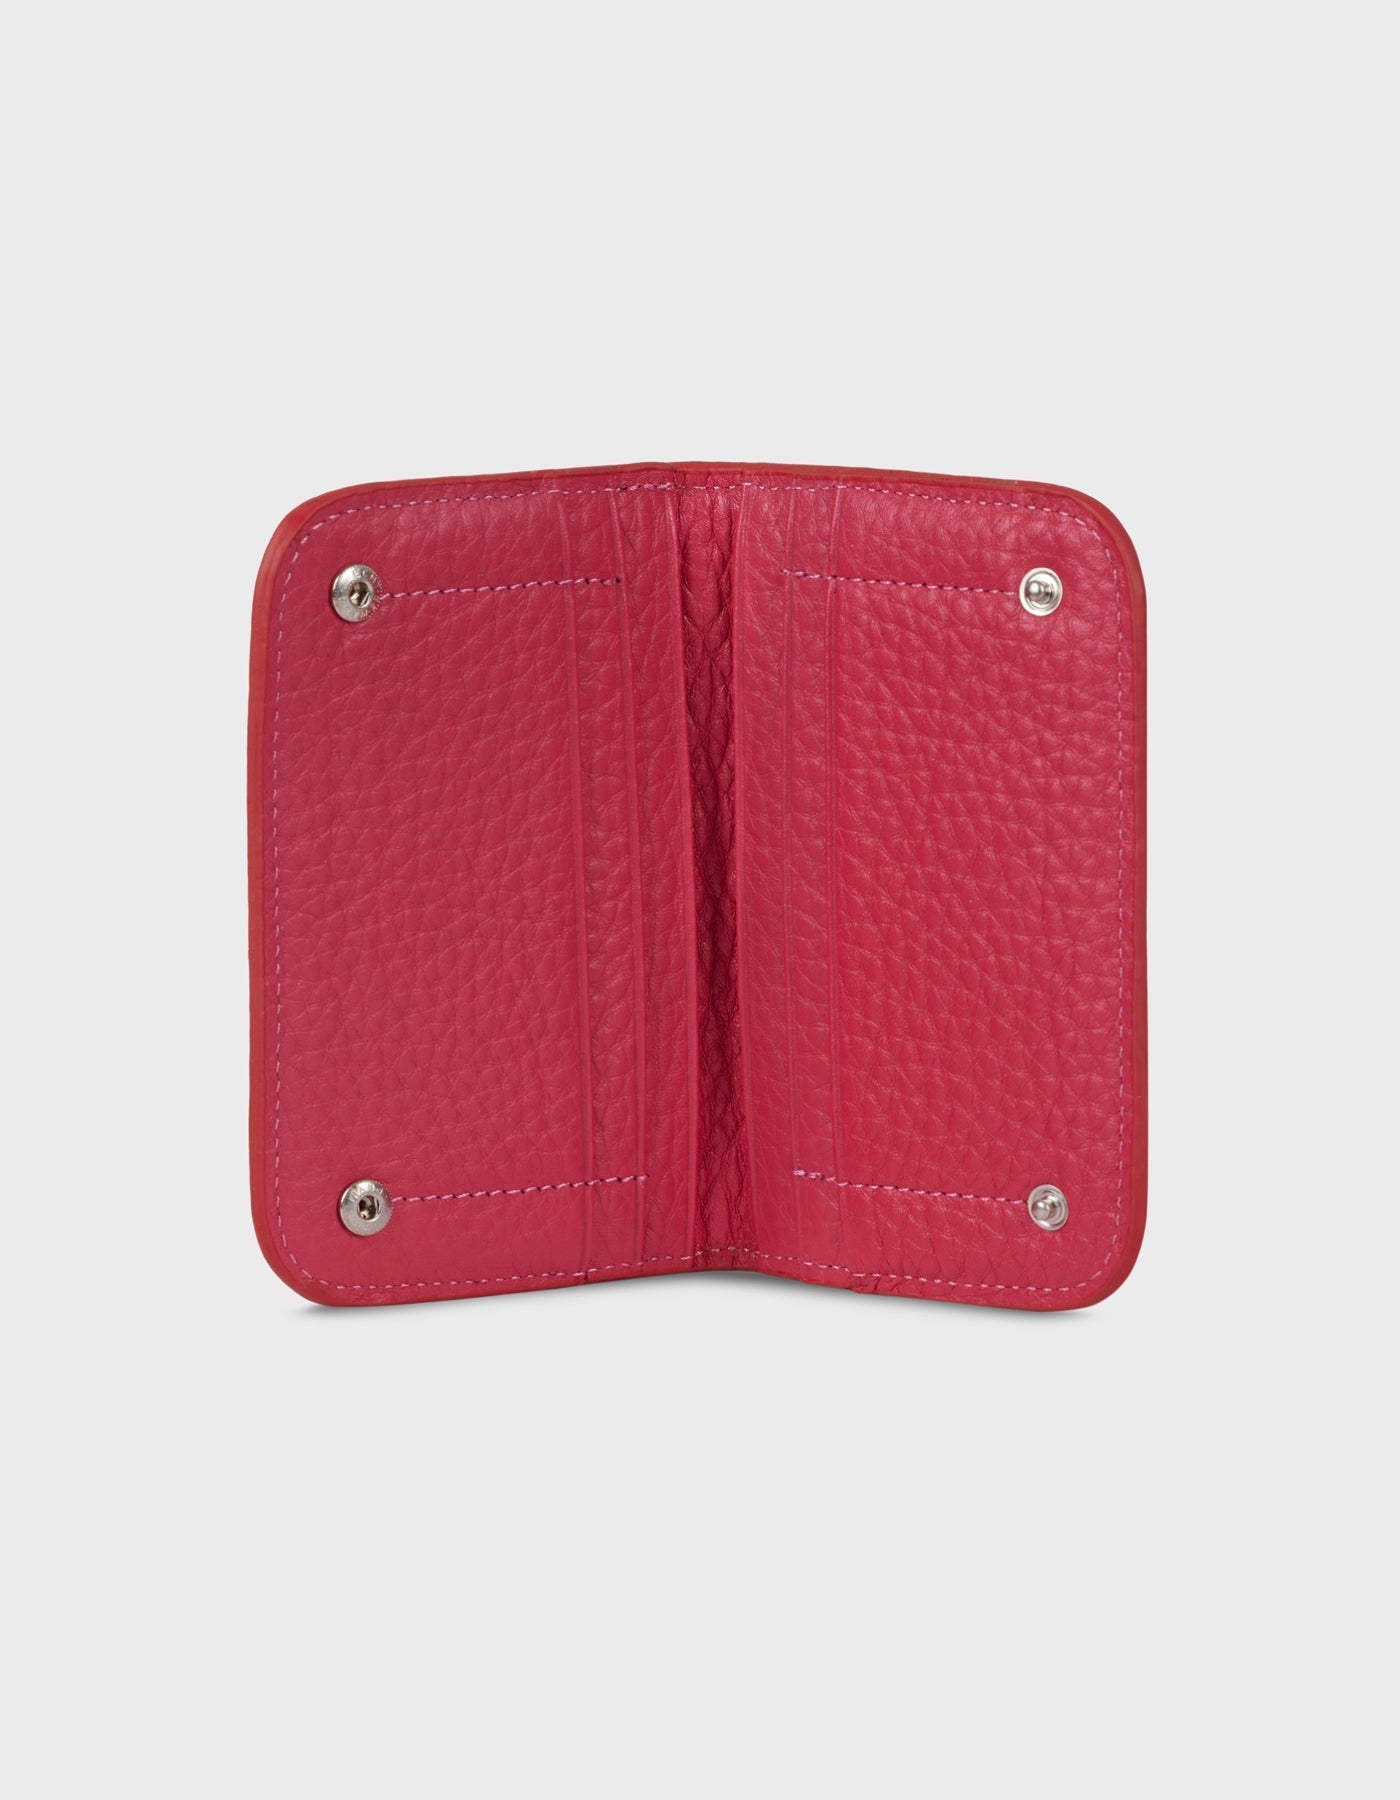 Hiva Atelier | Alae Coin Purse & Card Holder Coral | Beautiful and Versatile